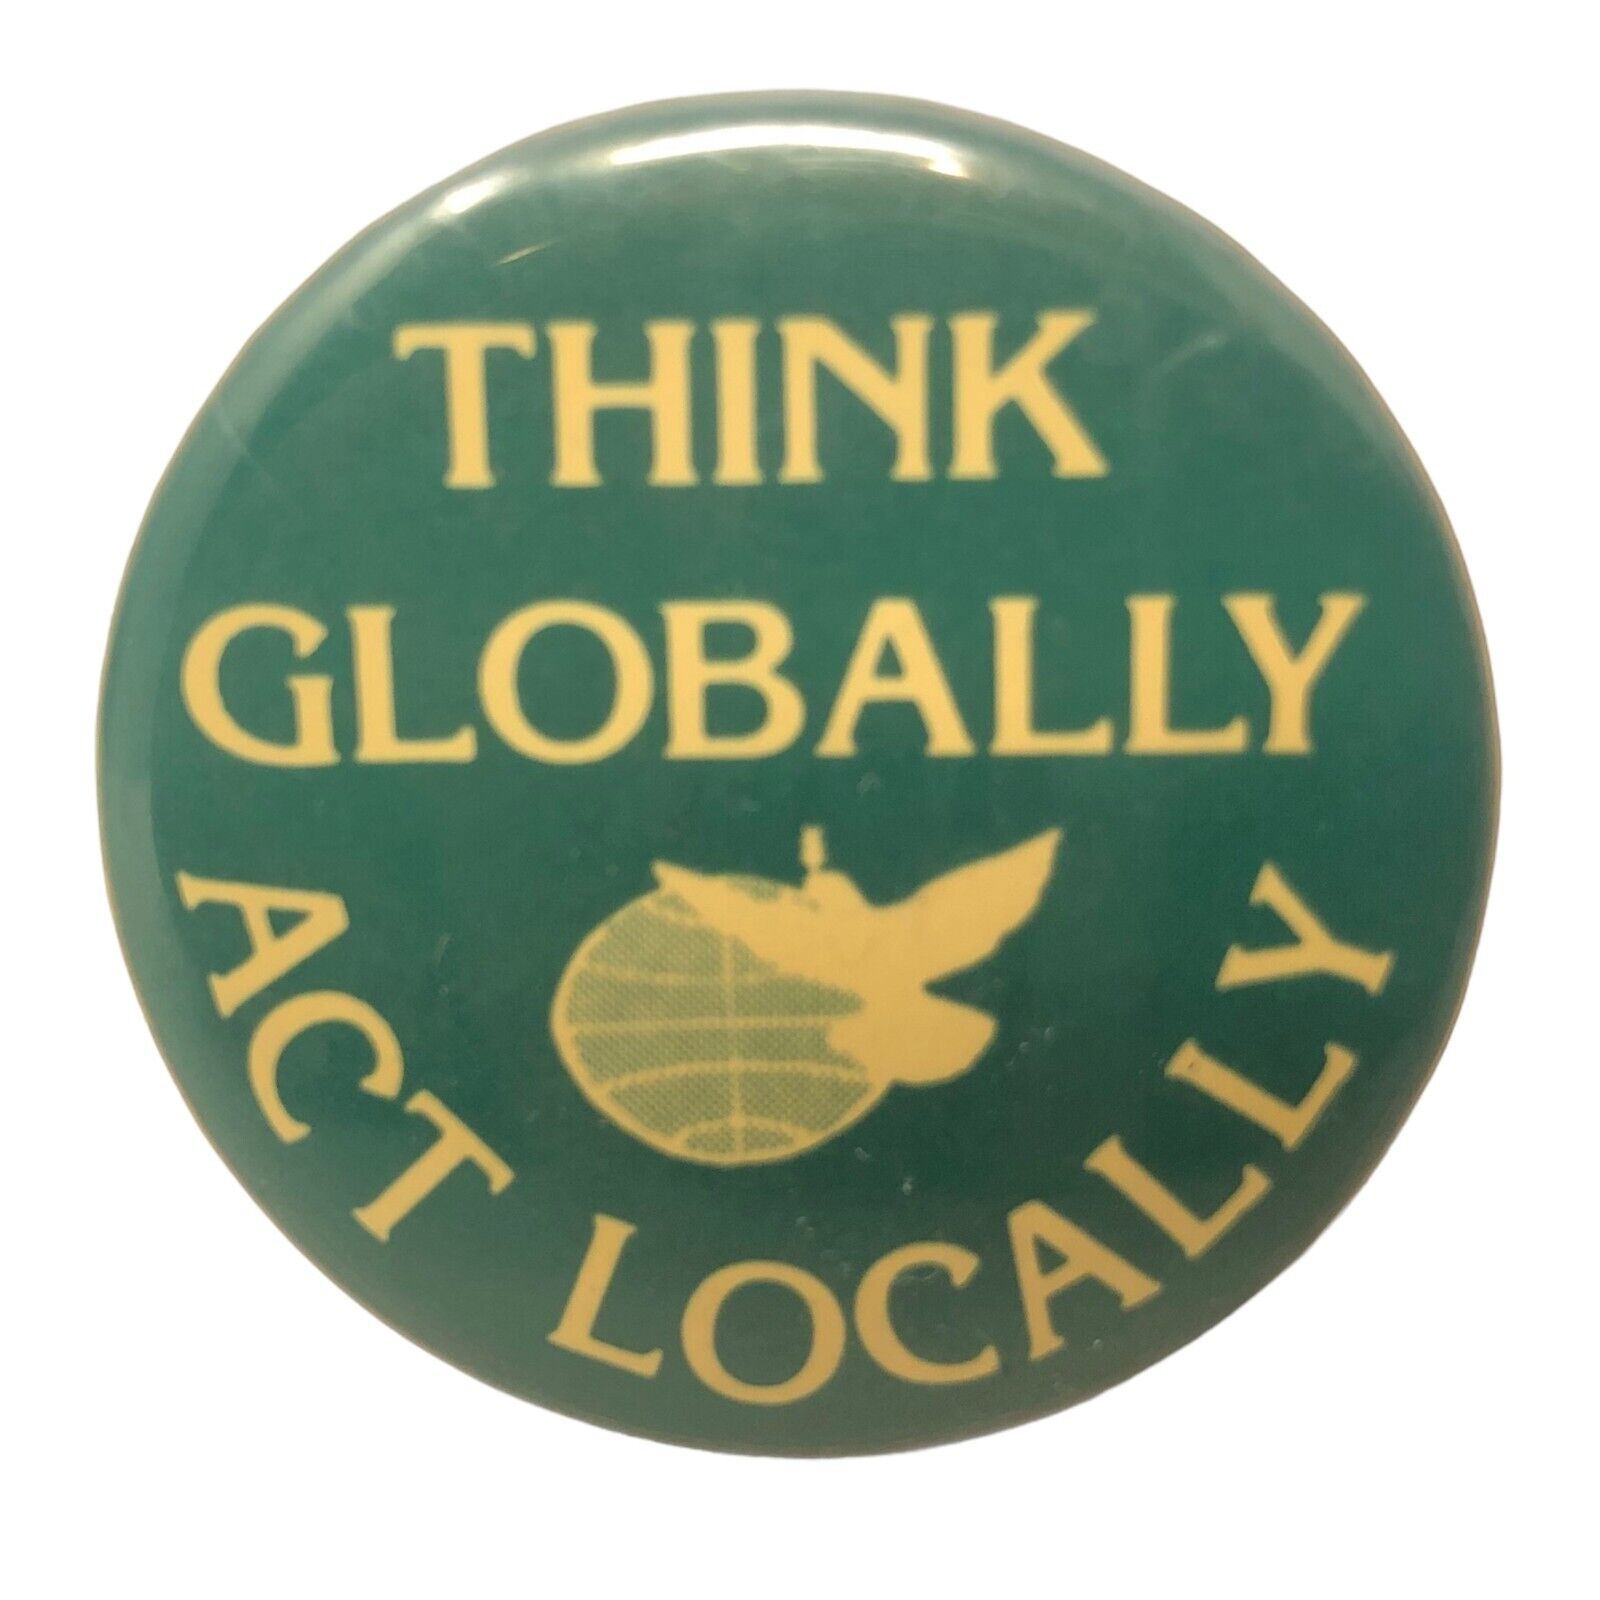 VTG Think Globally Act Locally 1960s Protest Button Pin Pinback Union Made